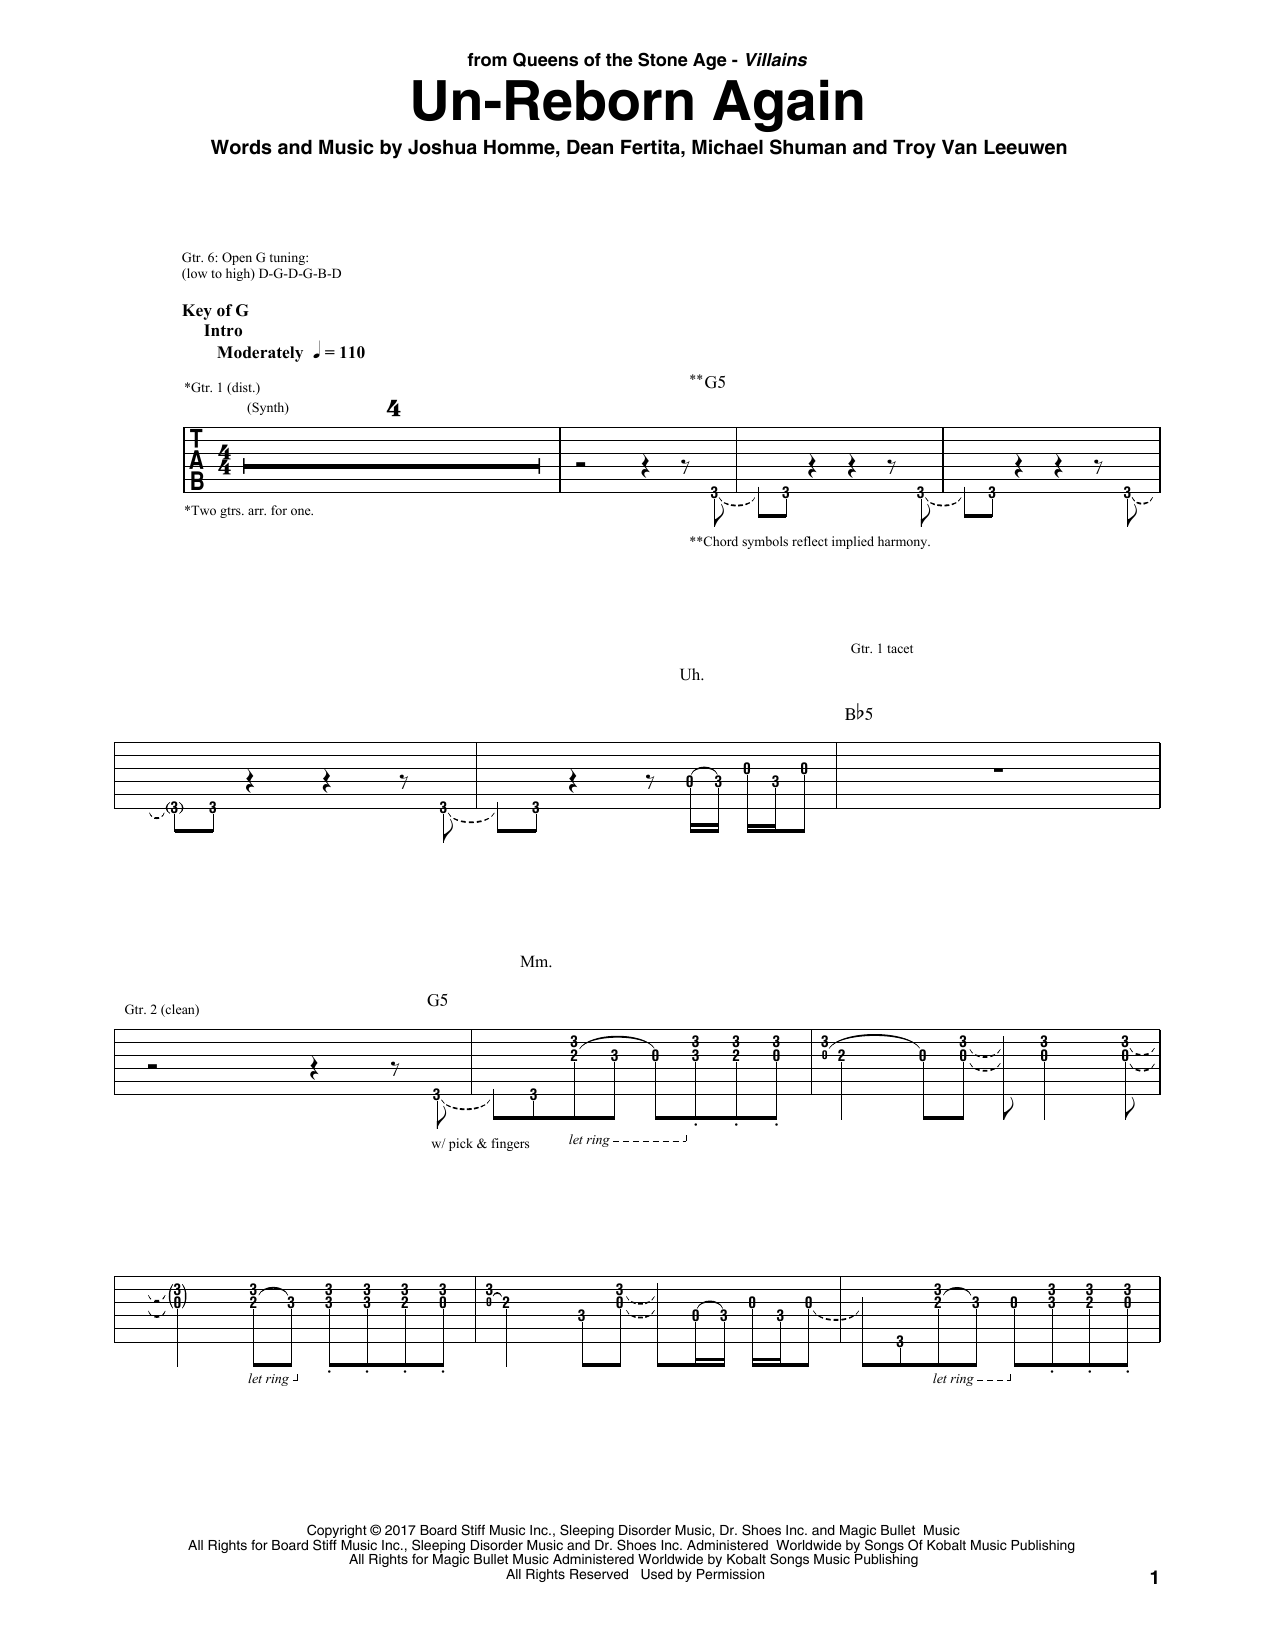 Download Queens Of The Stone Age Un-Reborn Again Sheet Music